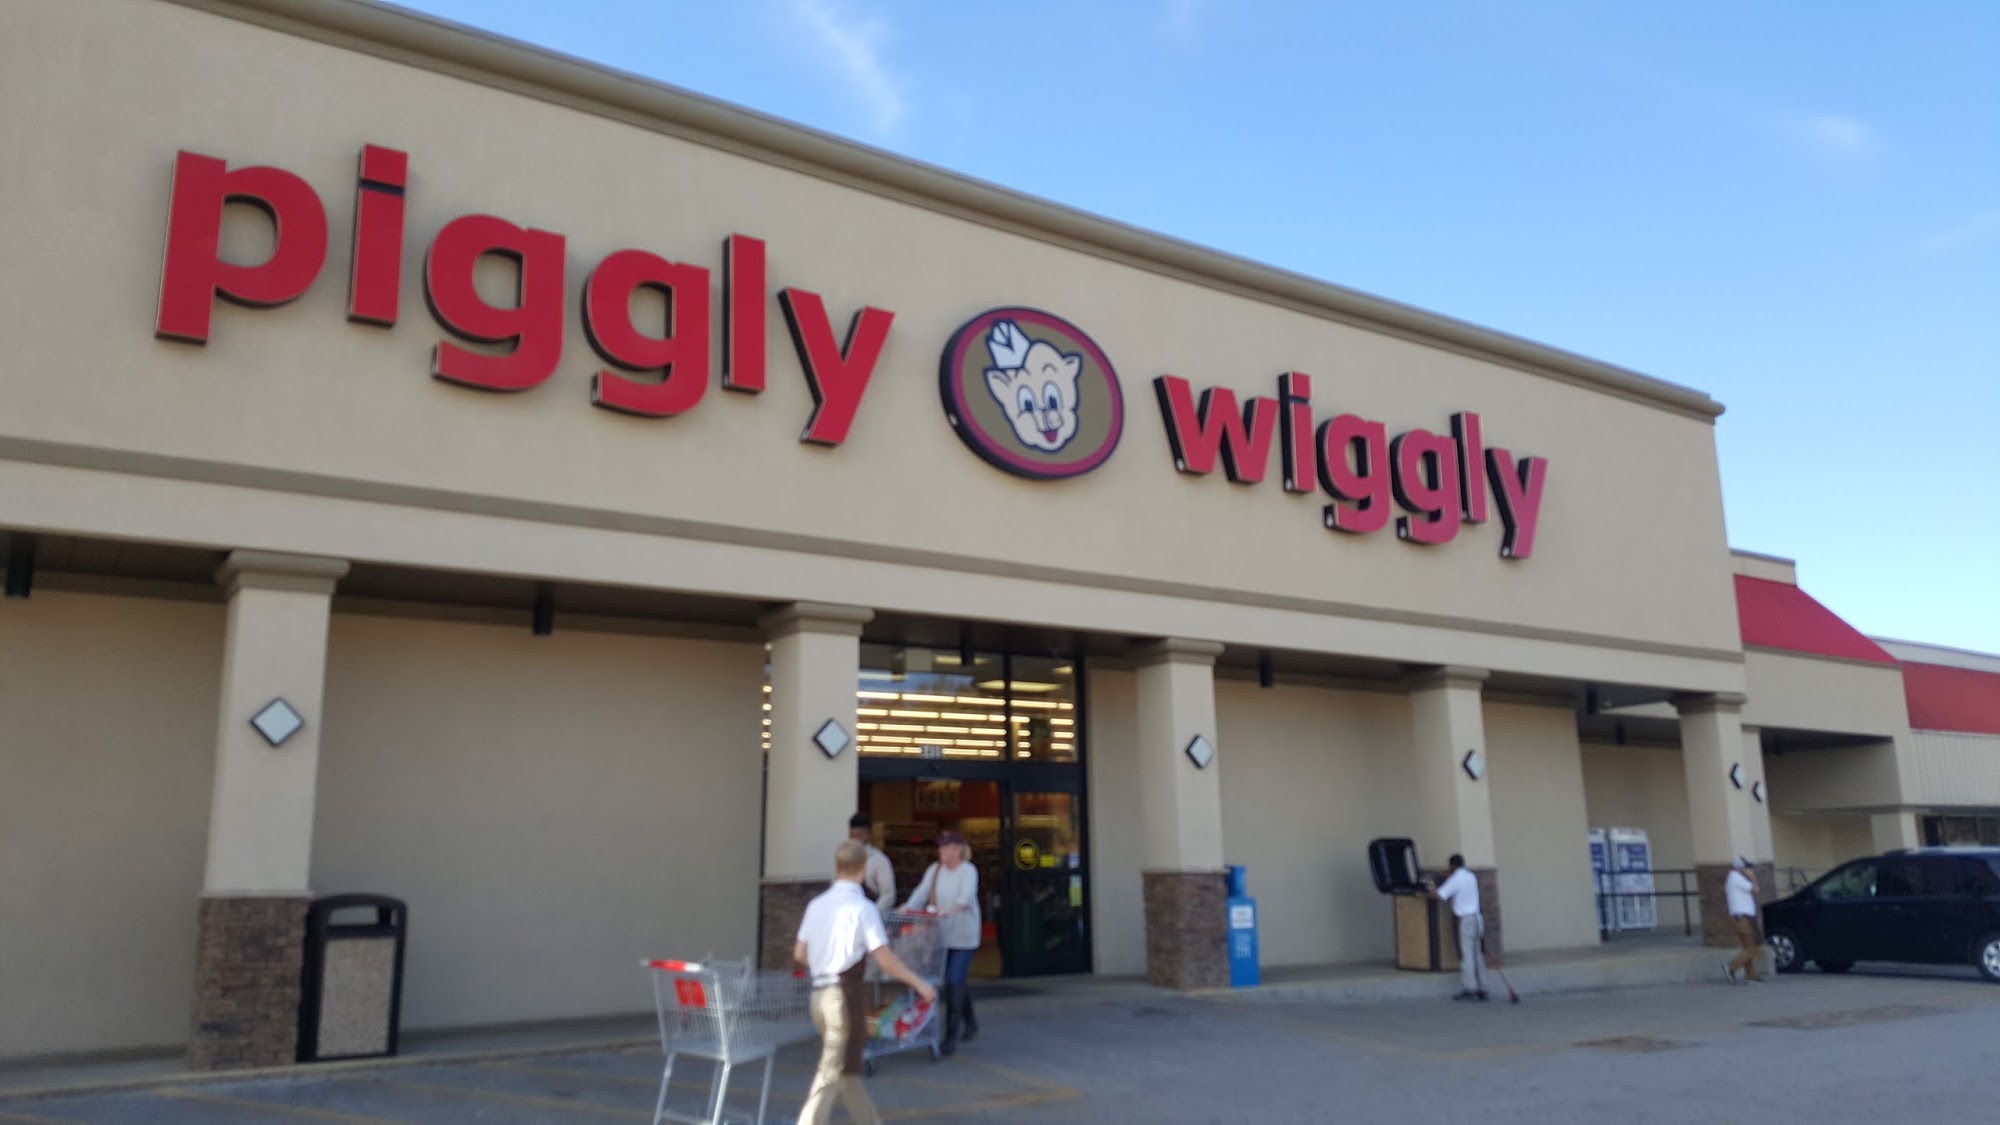 Piggly Wiggly of Olive Branch